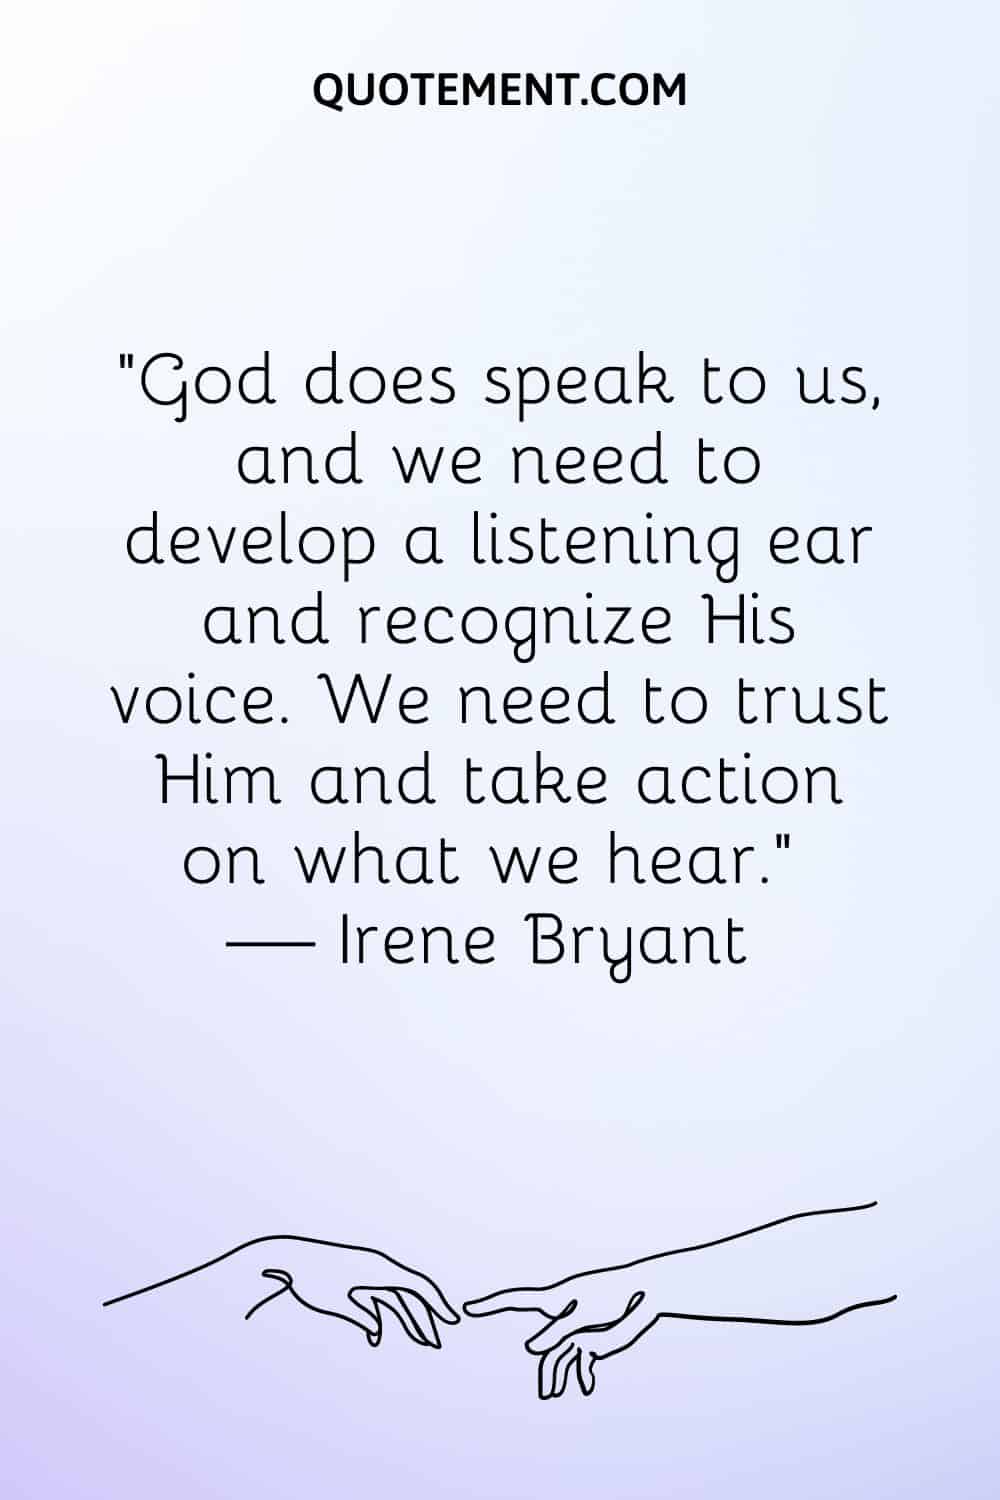 God does speak to us, and we need to develop a listening ear and recognize His voice